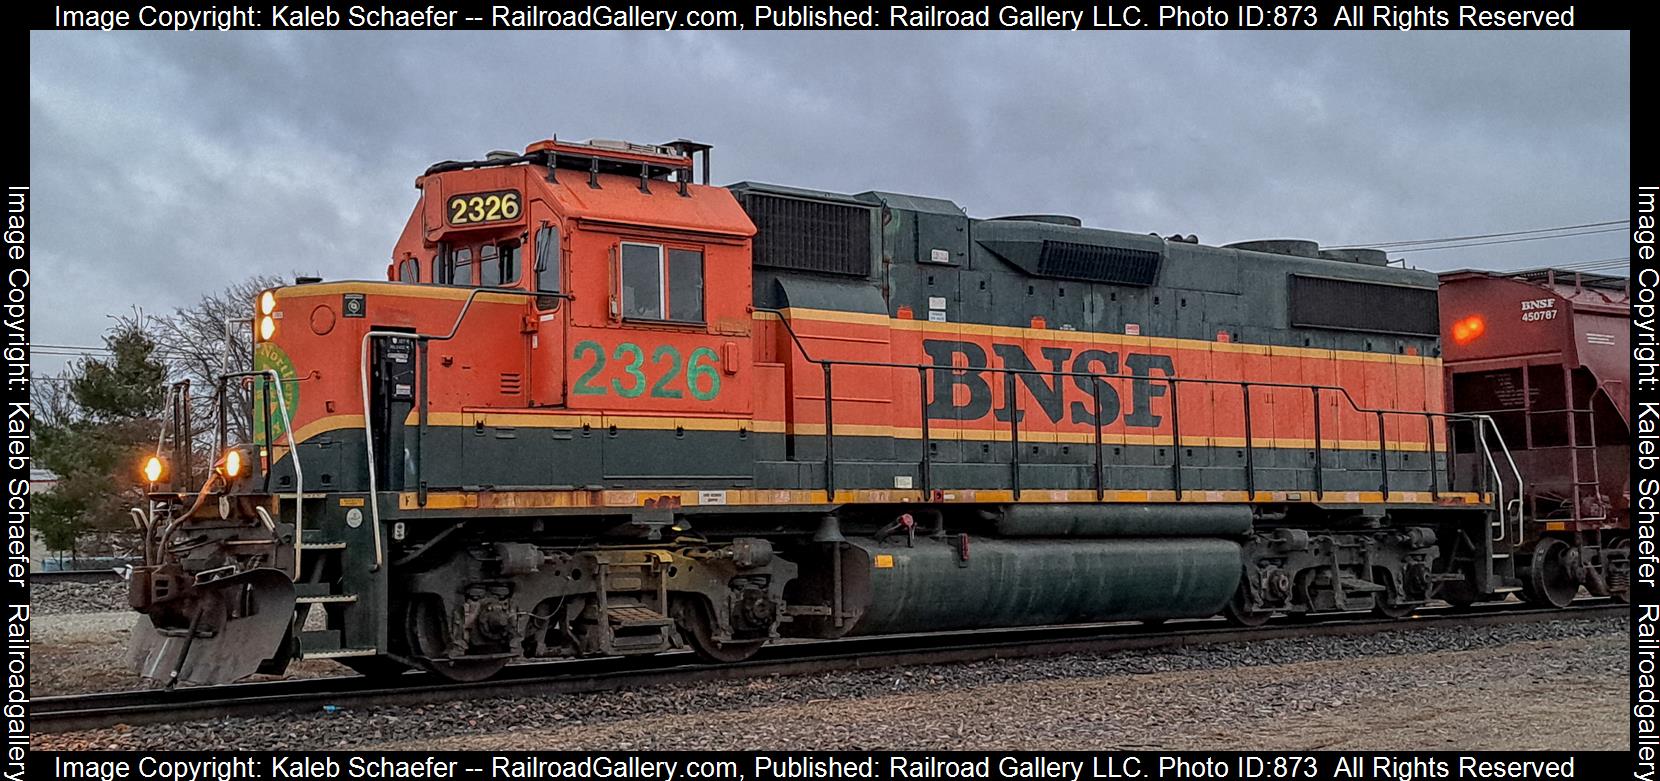 2326 is a class GP38-2 and  is pictured in Centralia , Illinois, USA.  This was taken along the BNSF Beardstown Subdivision  on the BNSF Railway. Photo Copyright: Kaleb Schaefer uploaded to Railroad Gallery on 03/23/2023. This photograph of 2326 was taken on Tuesday, March 21, 2023. All Rights Reserved. 